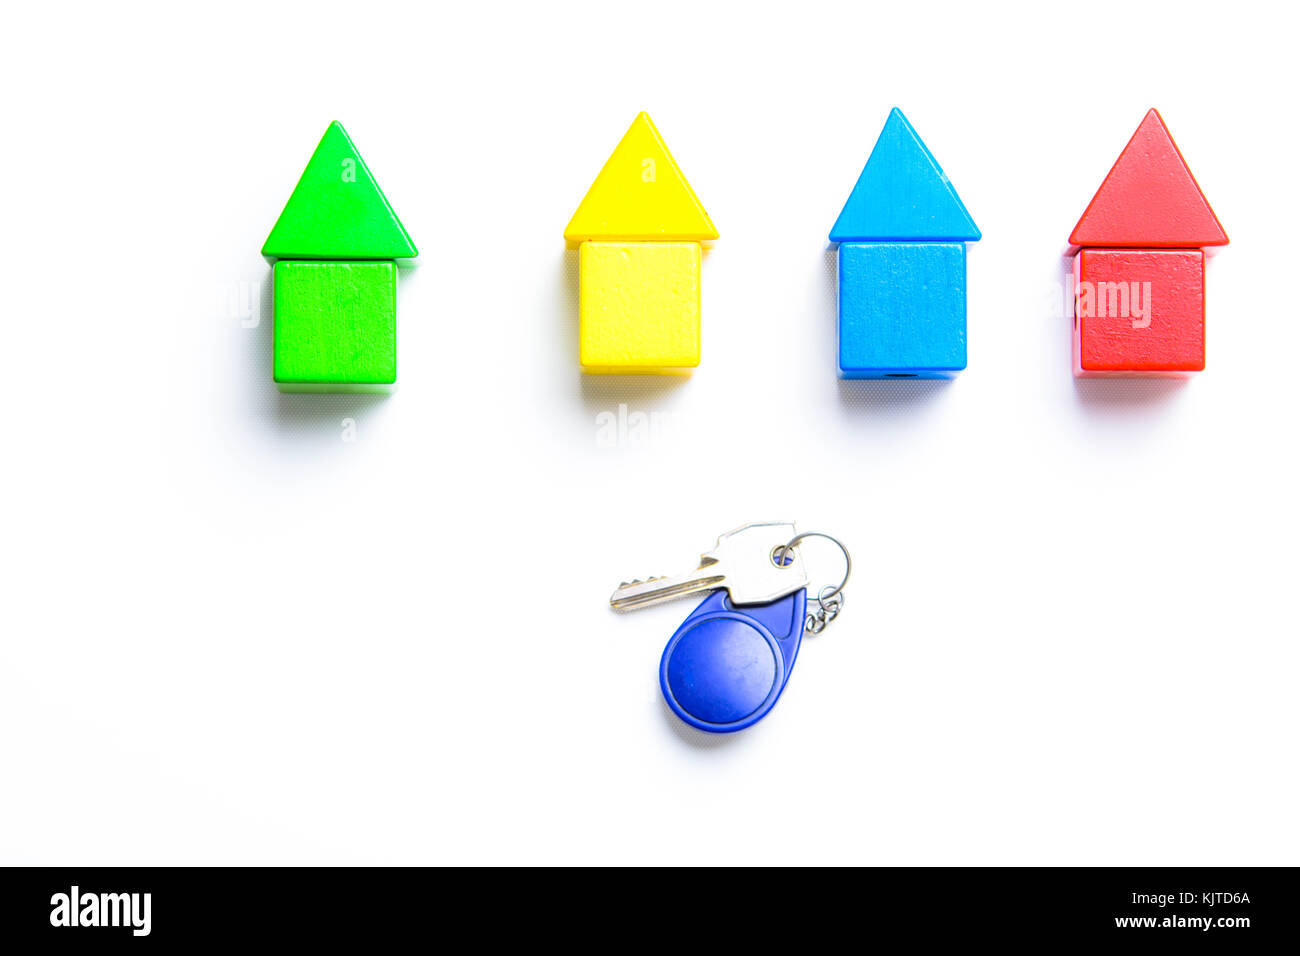 Choose to buy a type of house. Shapes and color of a house. Stock Photo